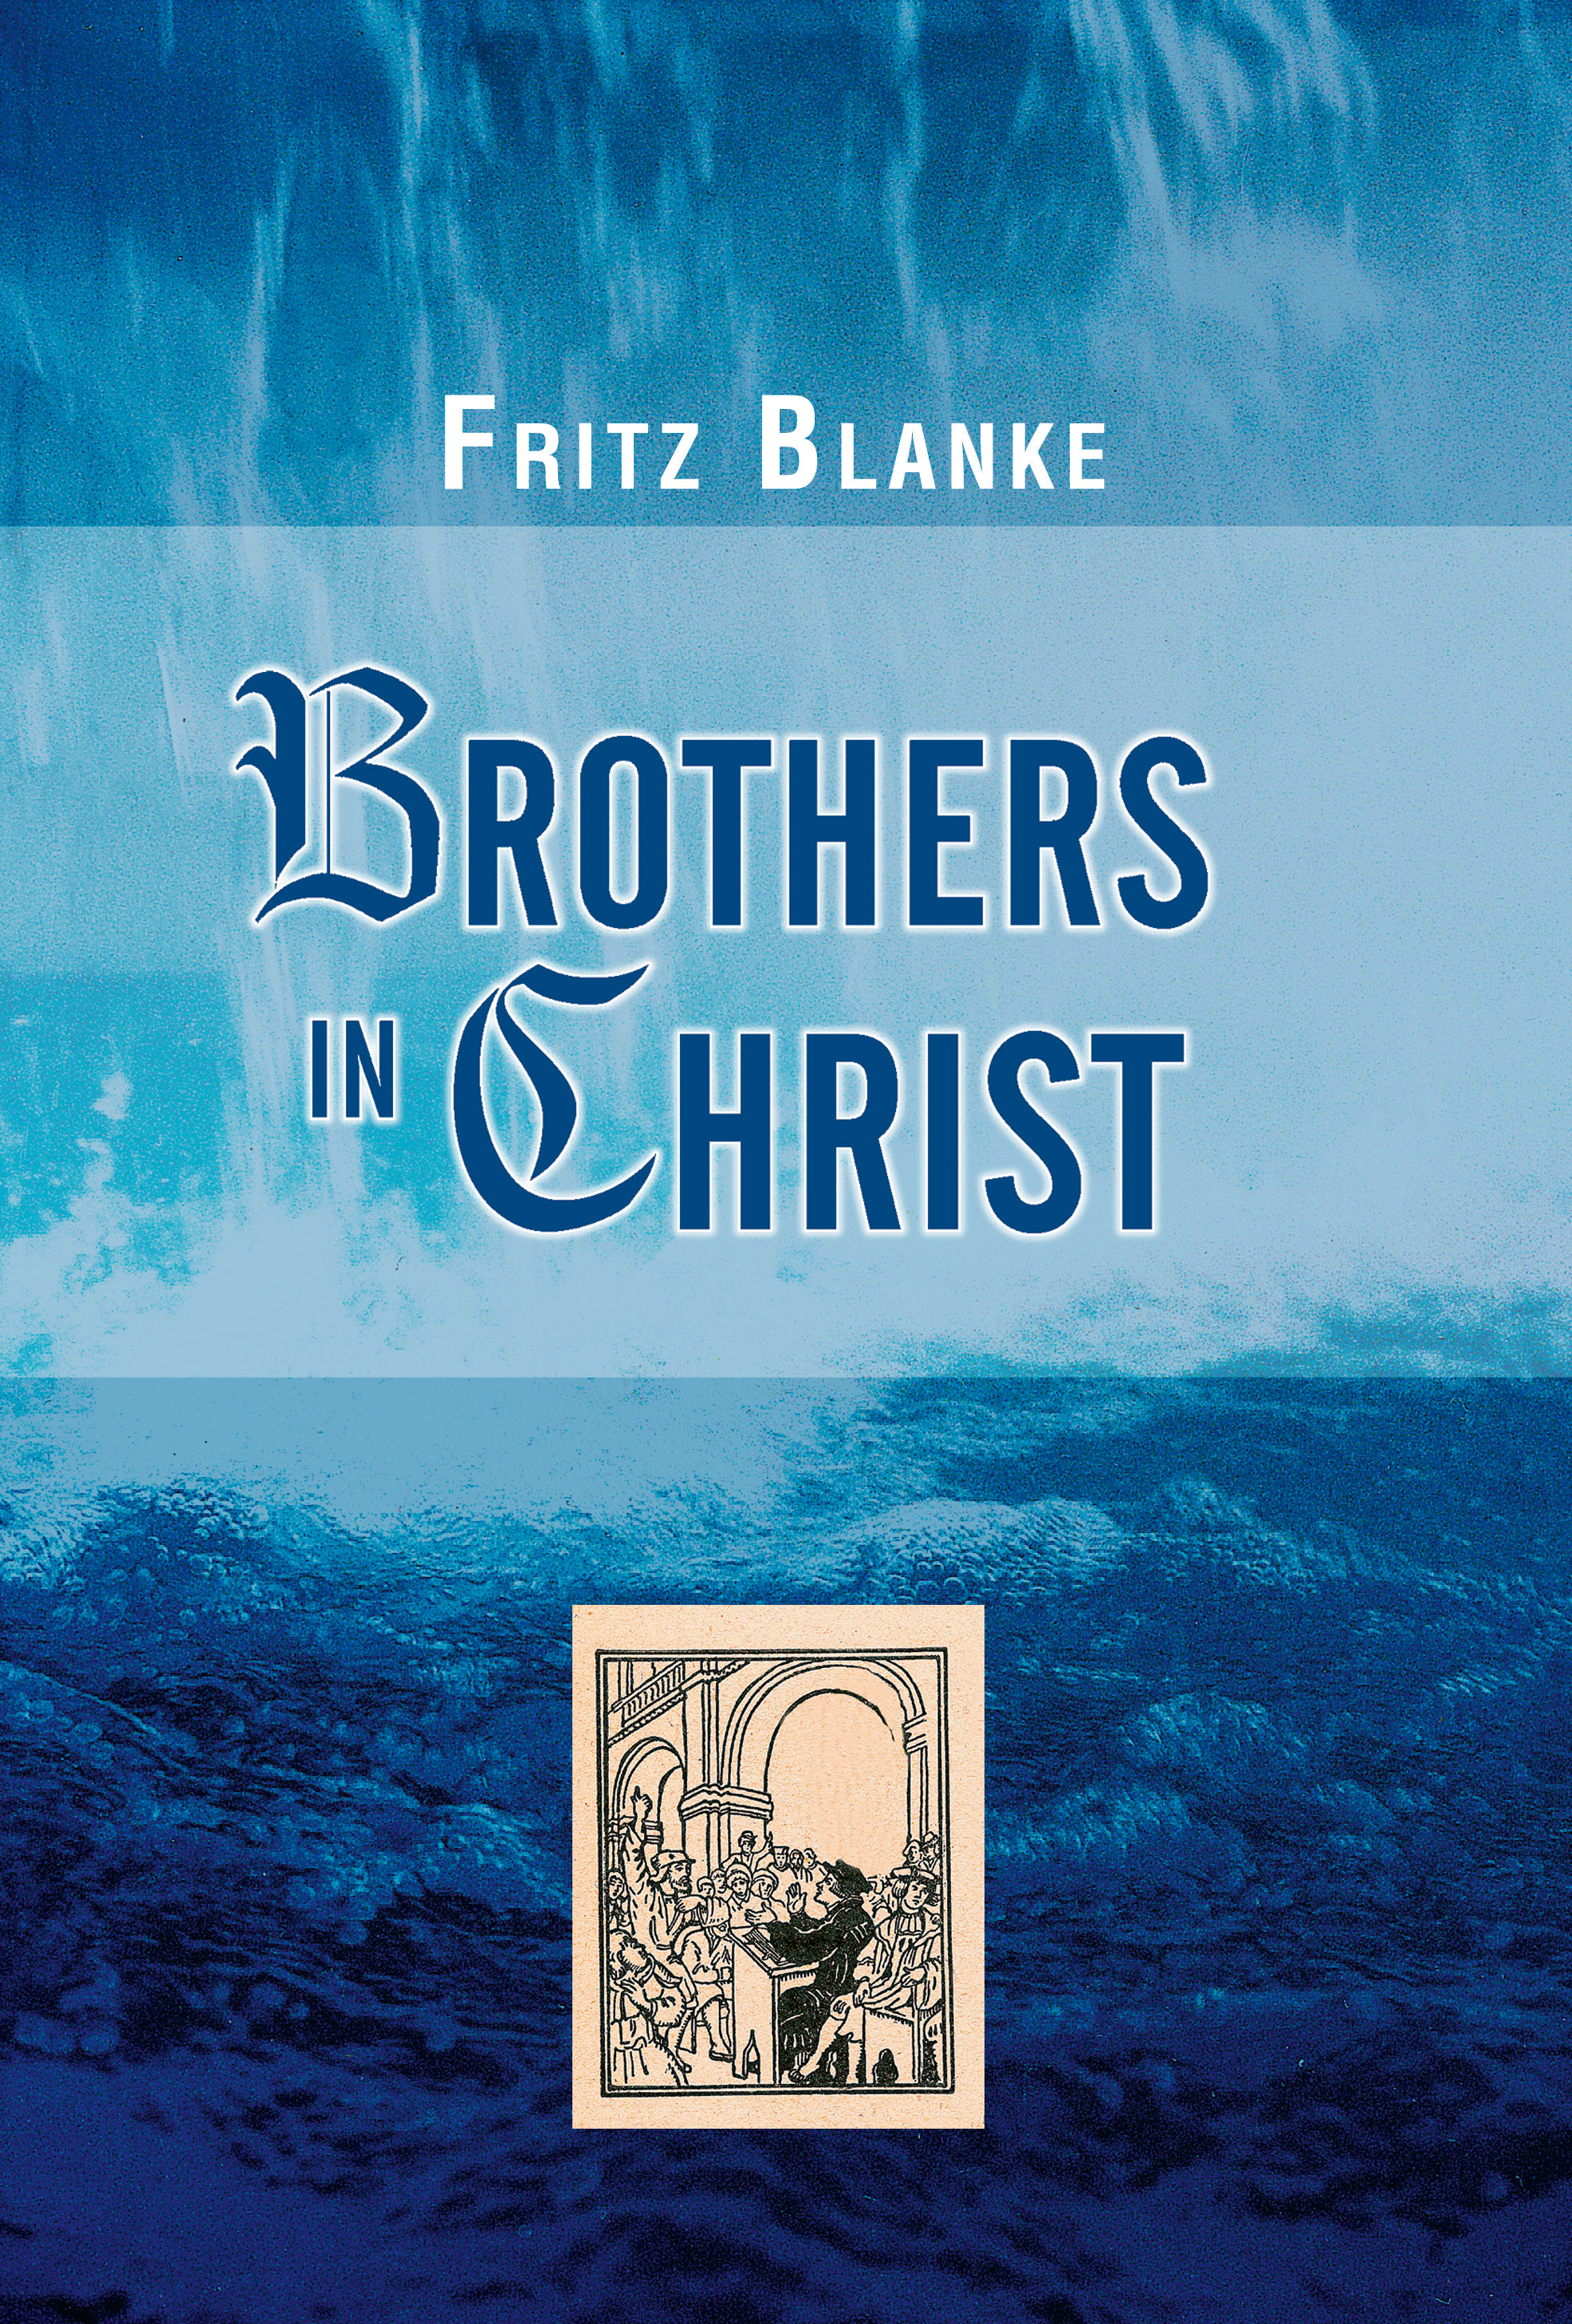 Brothers in Christ, Fritz Blanke